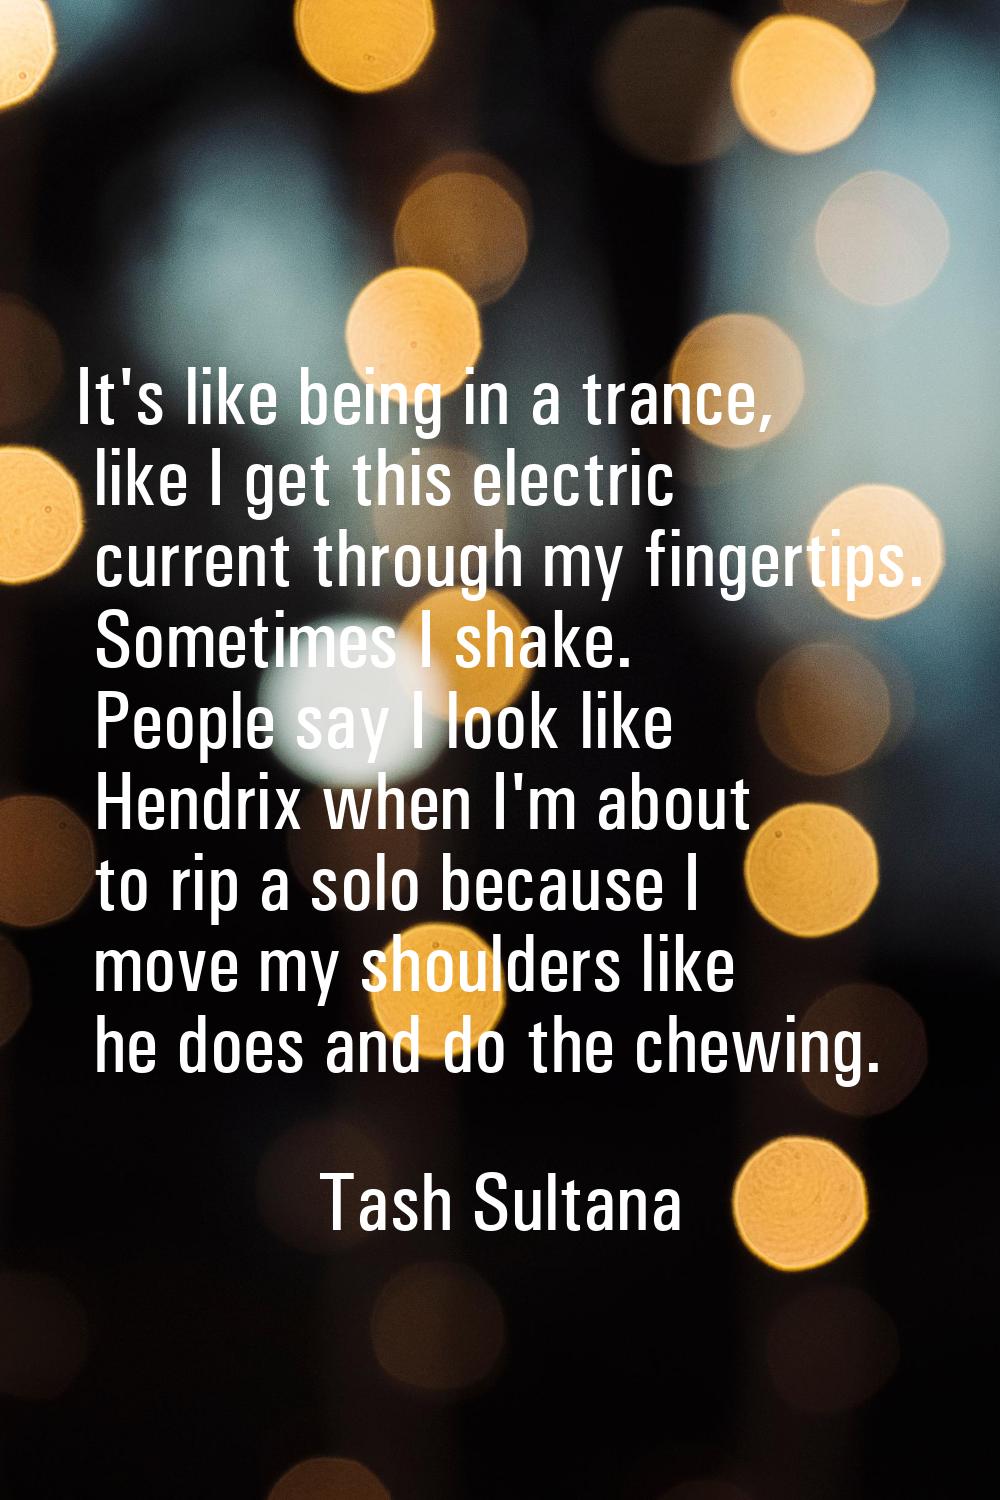 It's like being in a trance, like I get this electric current through my fingertips. Sometimes I sh